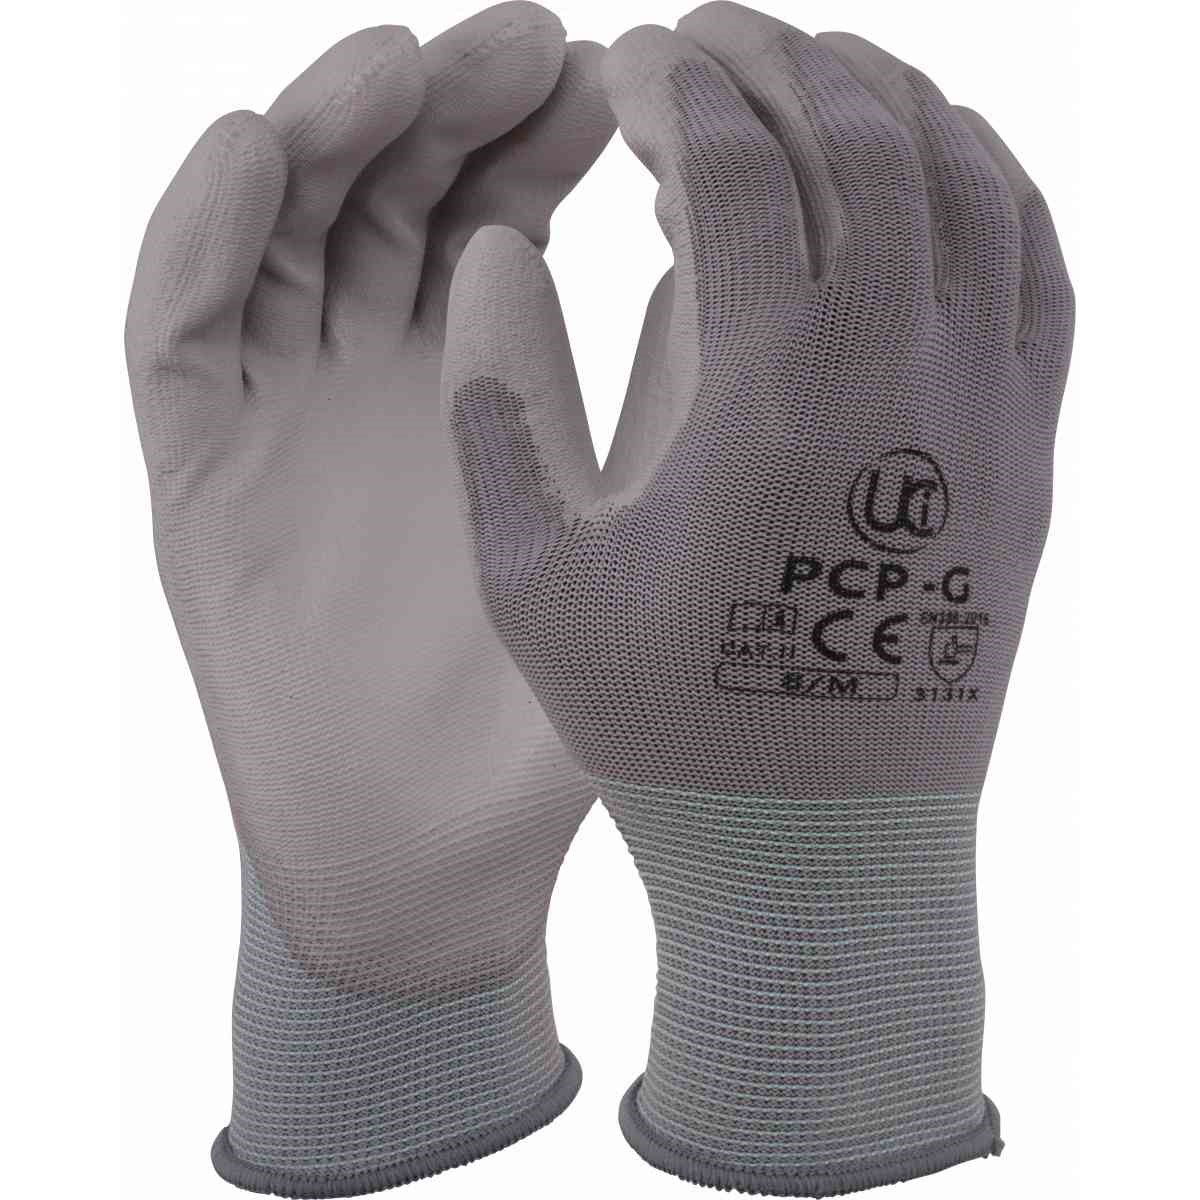 10 Pairs Of UCI PCP-G GREY PU Precise Palm Coated Safety Work Gloves Size 10 